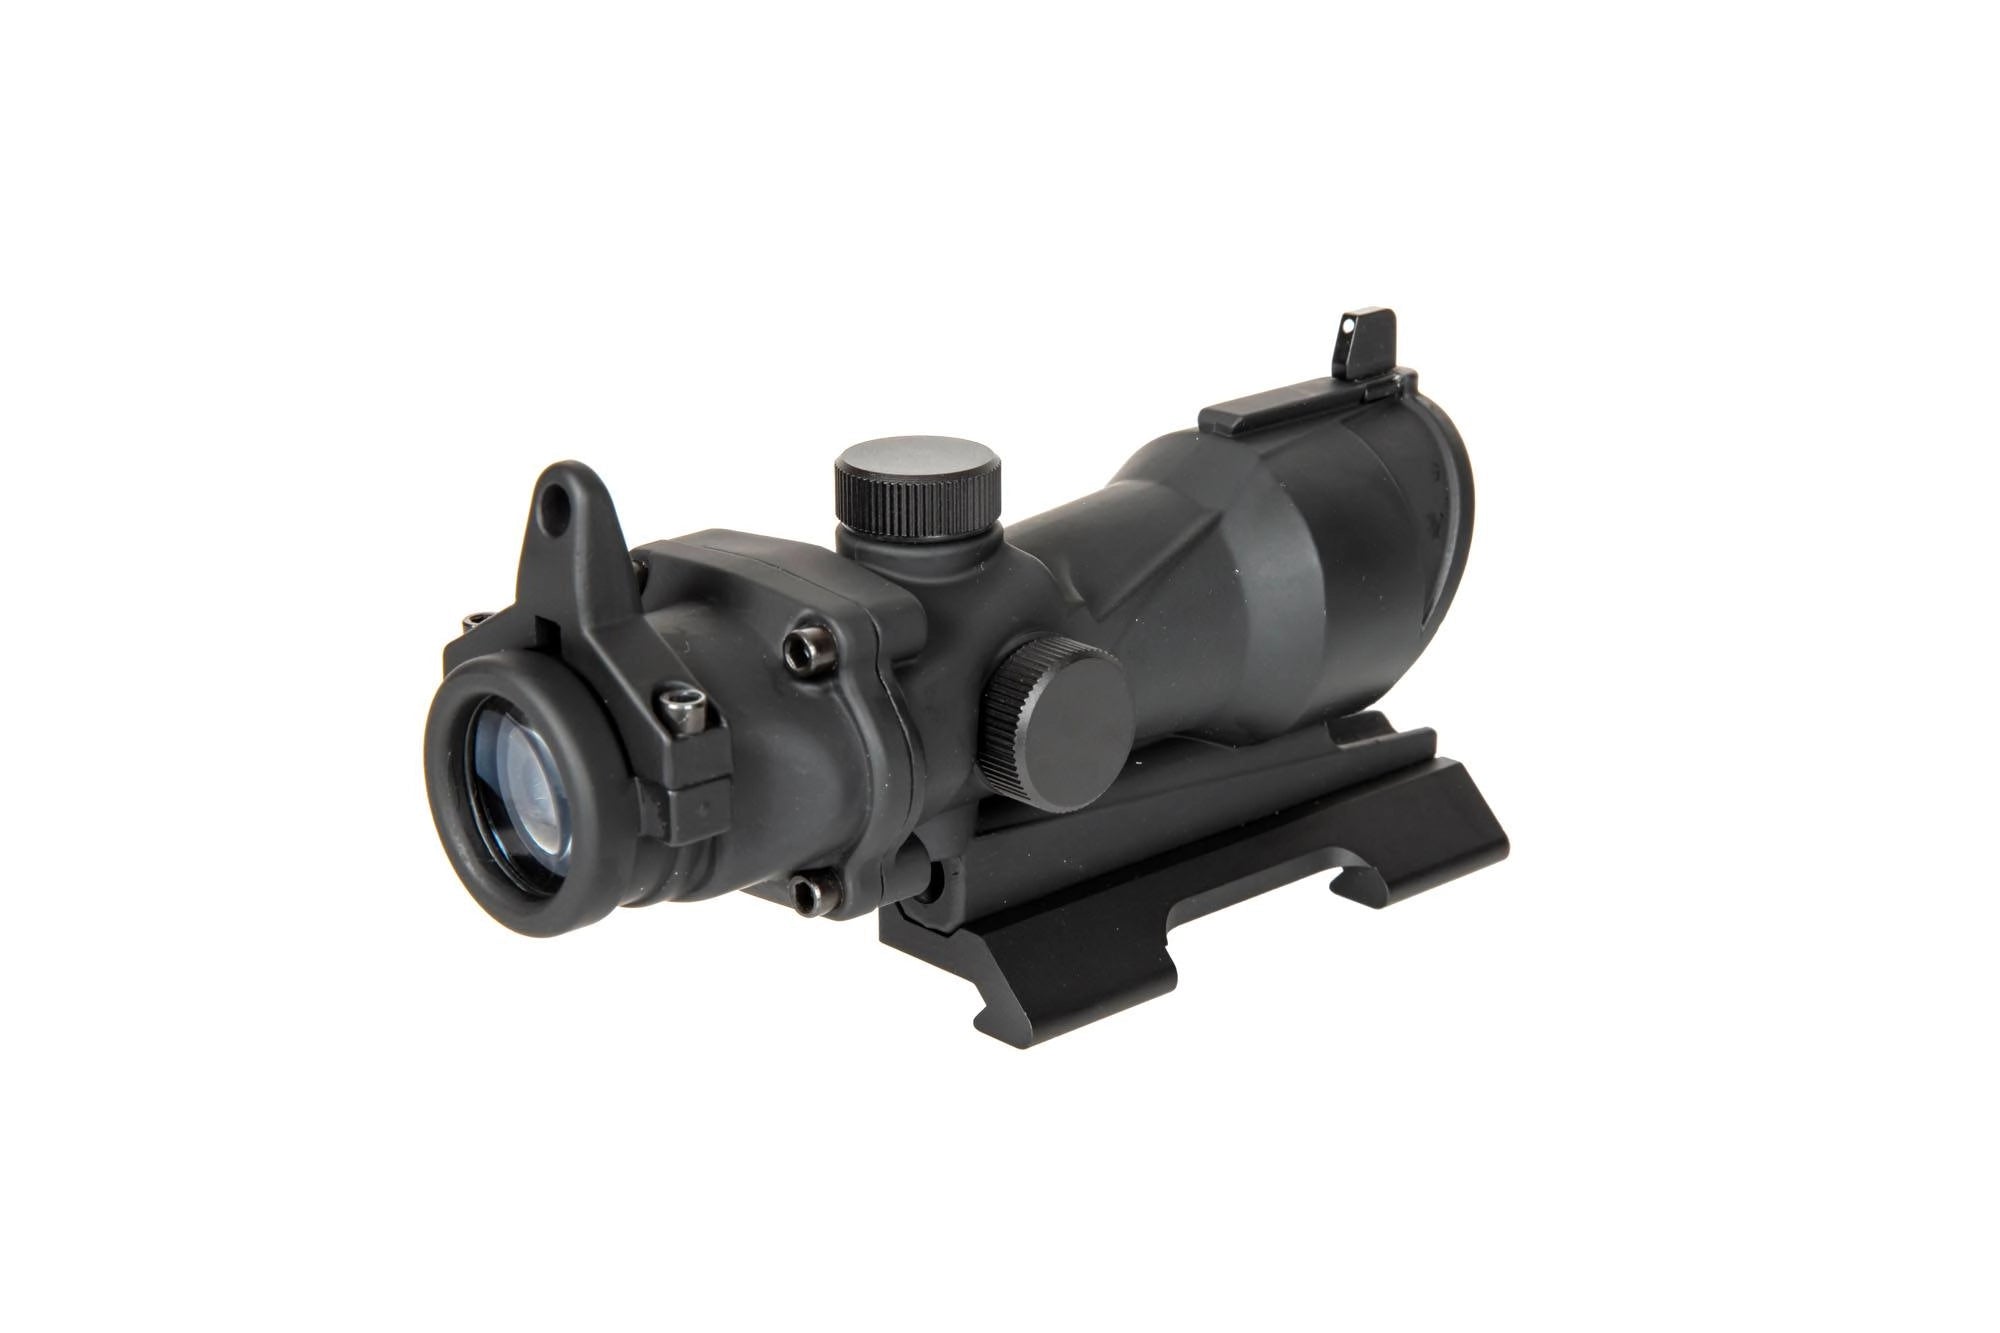 ACOG Style 4x32 Scope Replica with Killflash Cover and QD V2 Mount - Black-1